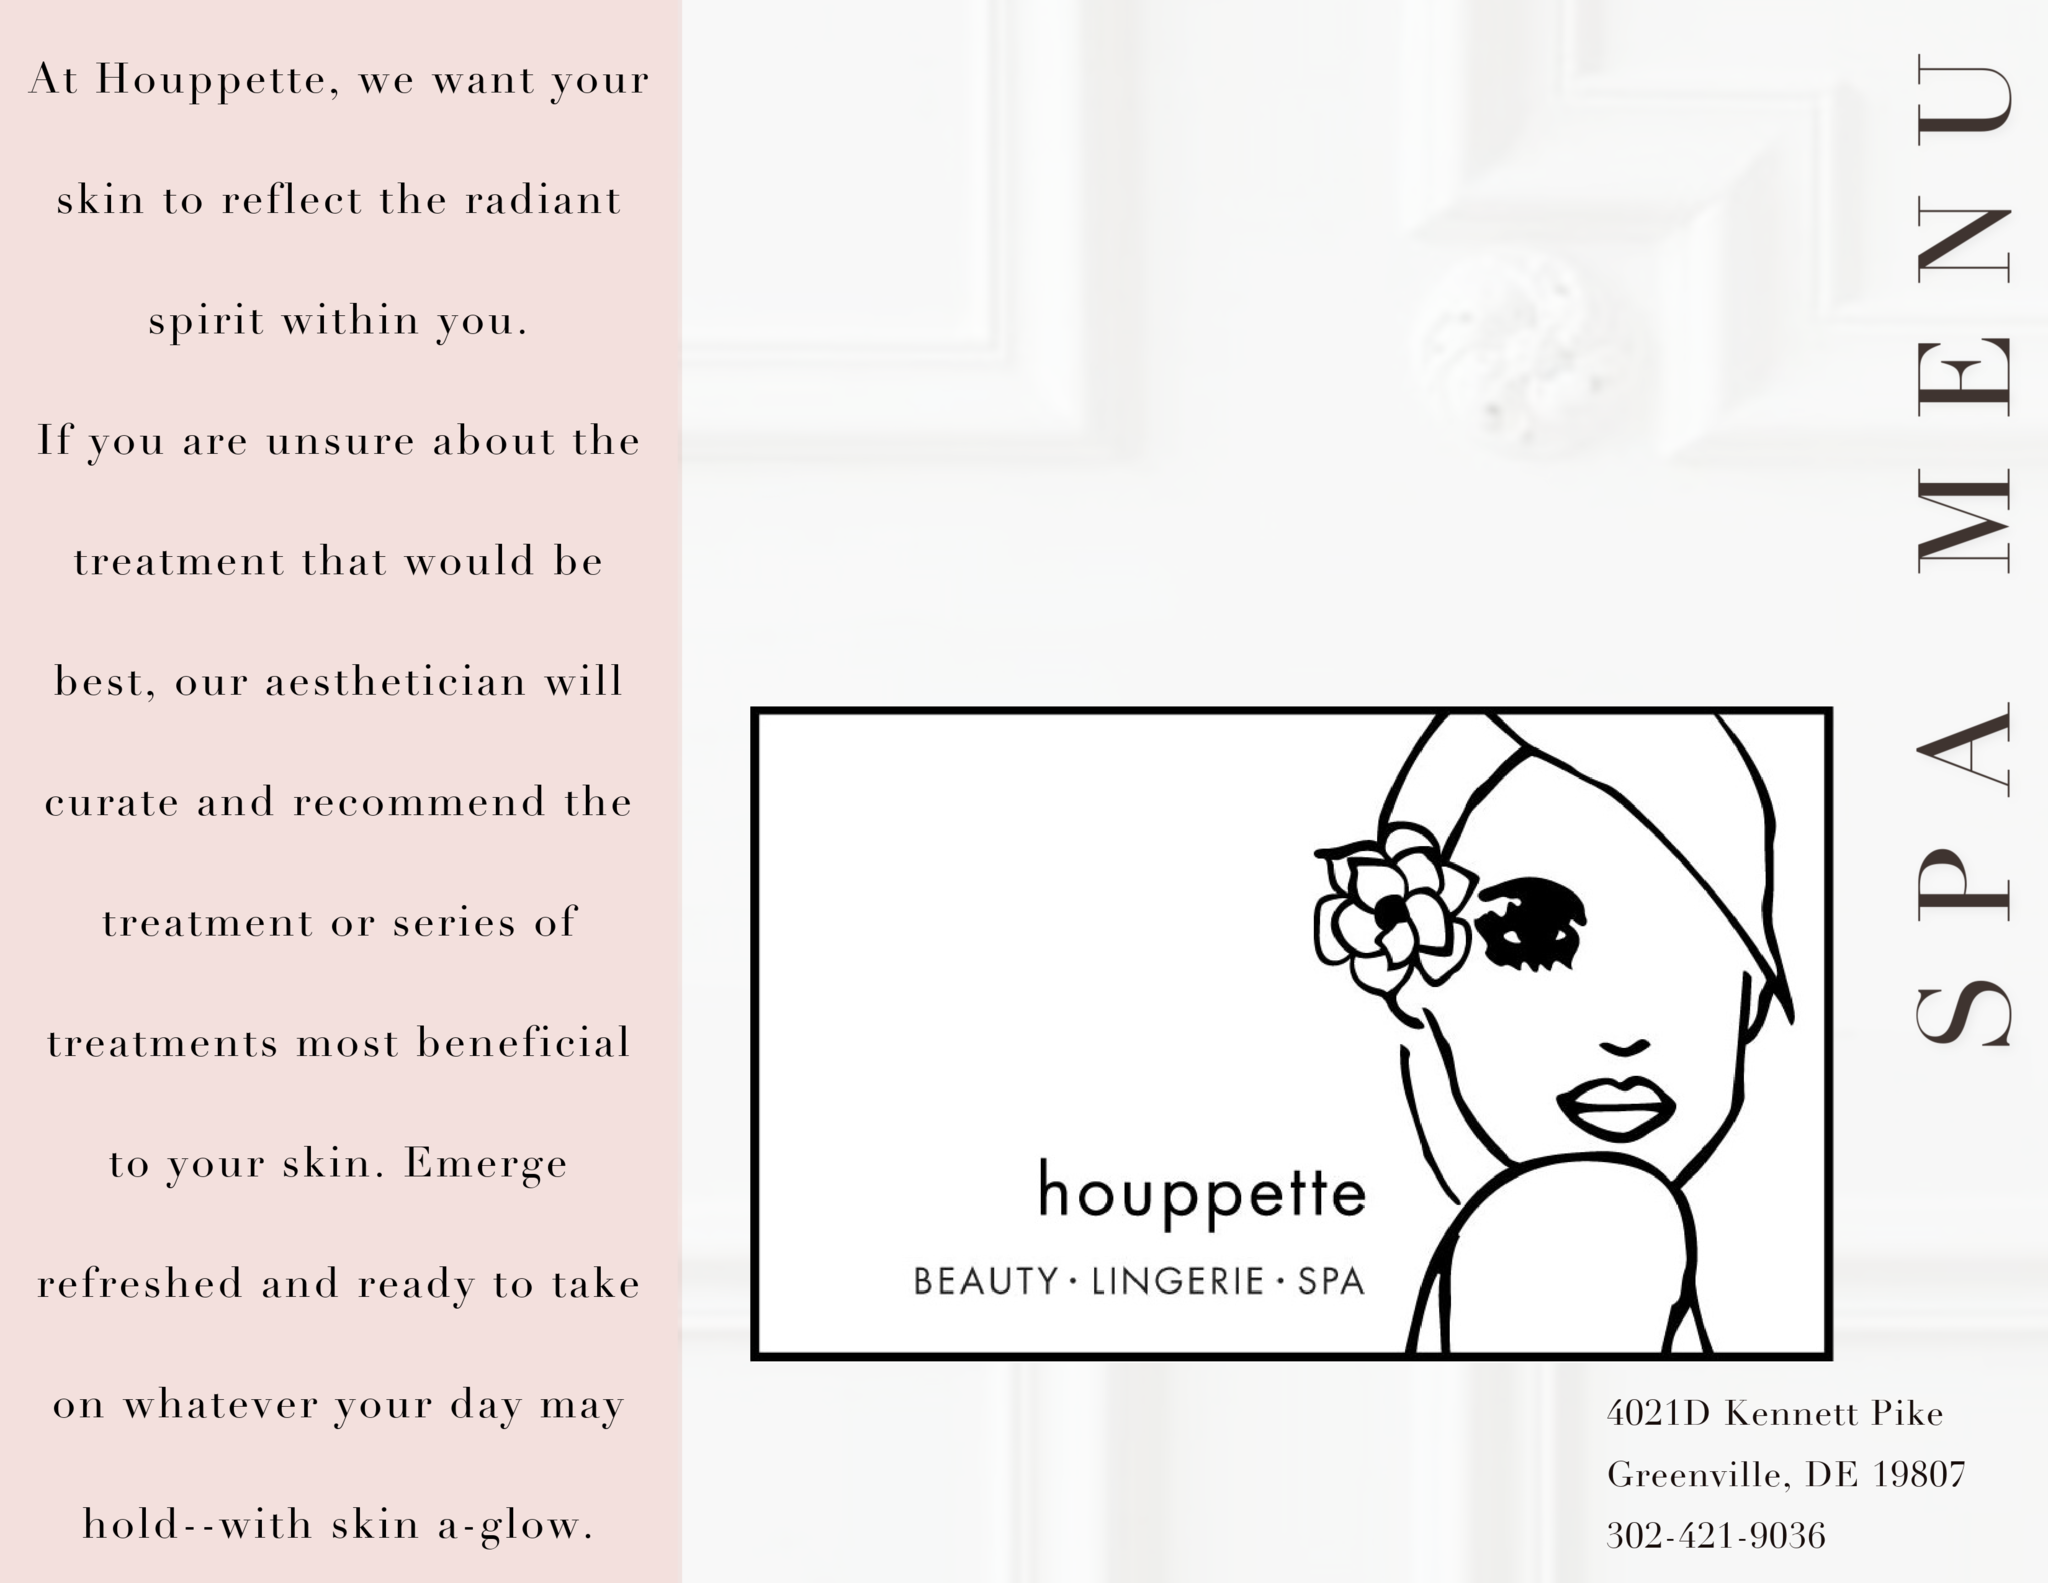 Spa Services | Houppette, Cosmetics Boutique and Spa - Houppette